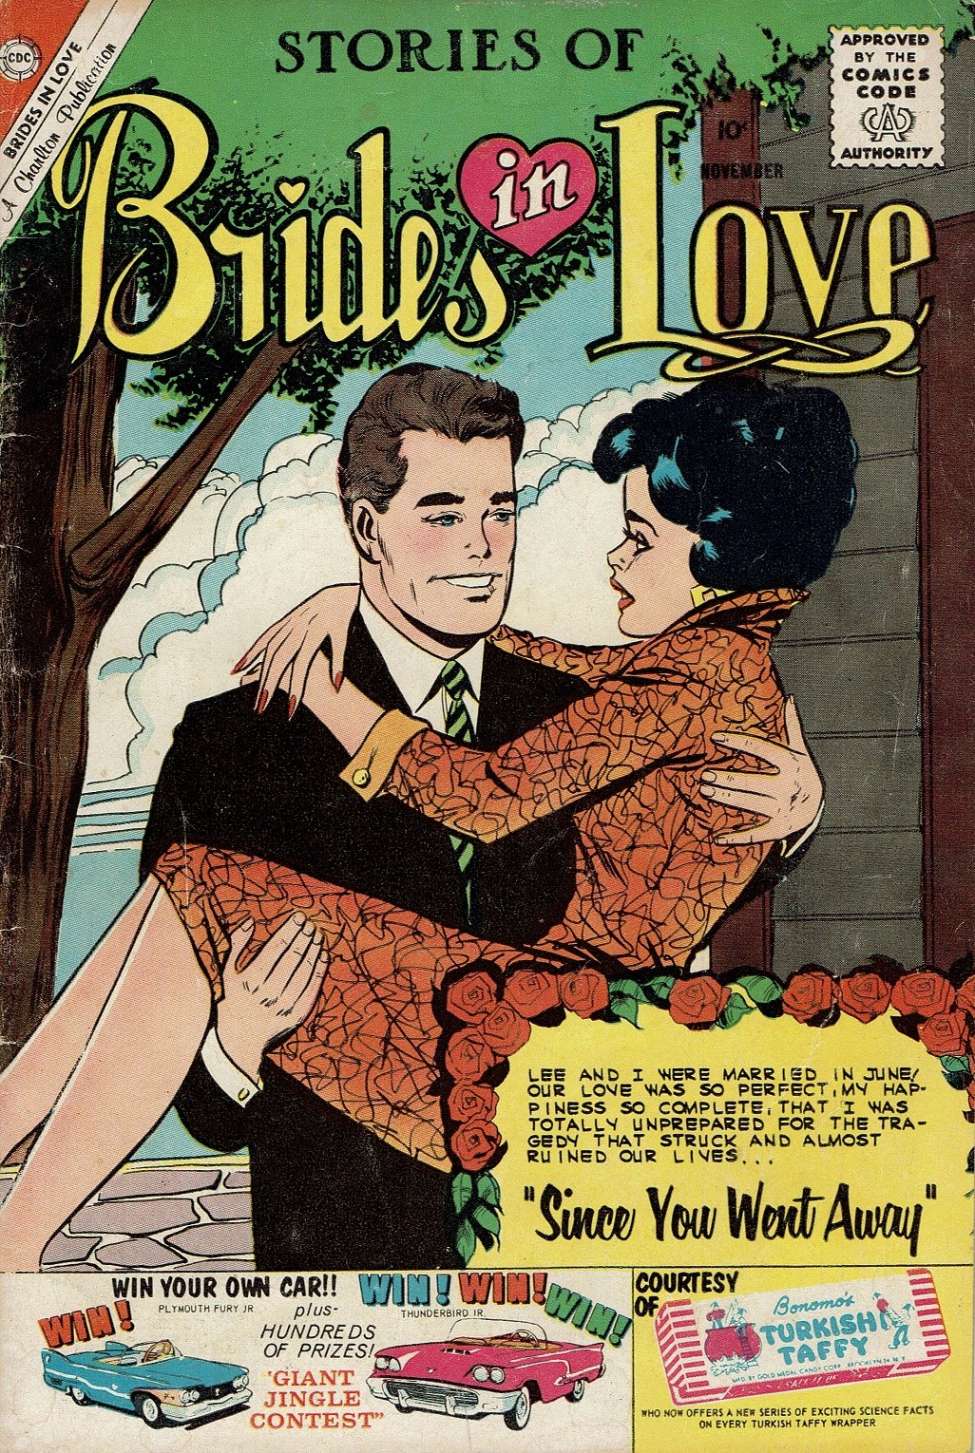 Book Cover For Brides in Love 21